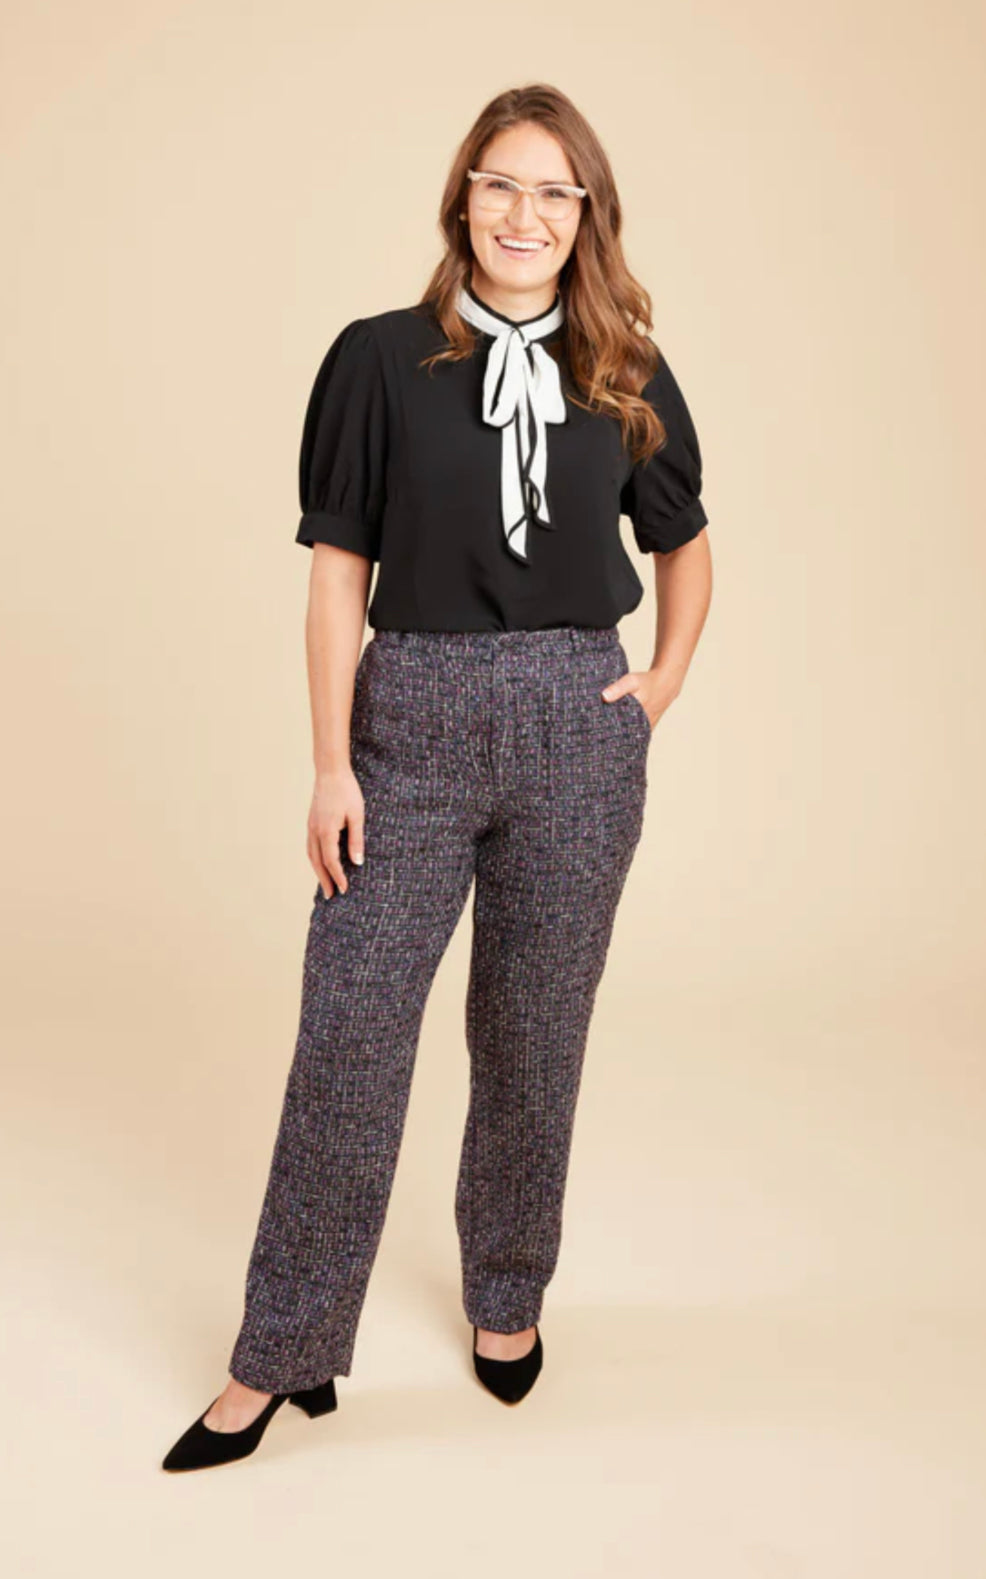 Cashmerette Meriam Trousers Sewing Pattern 0-16